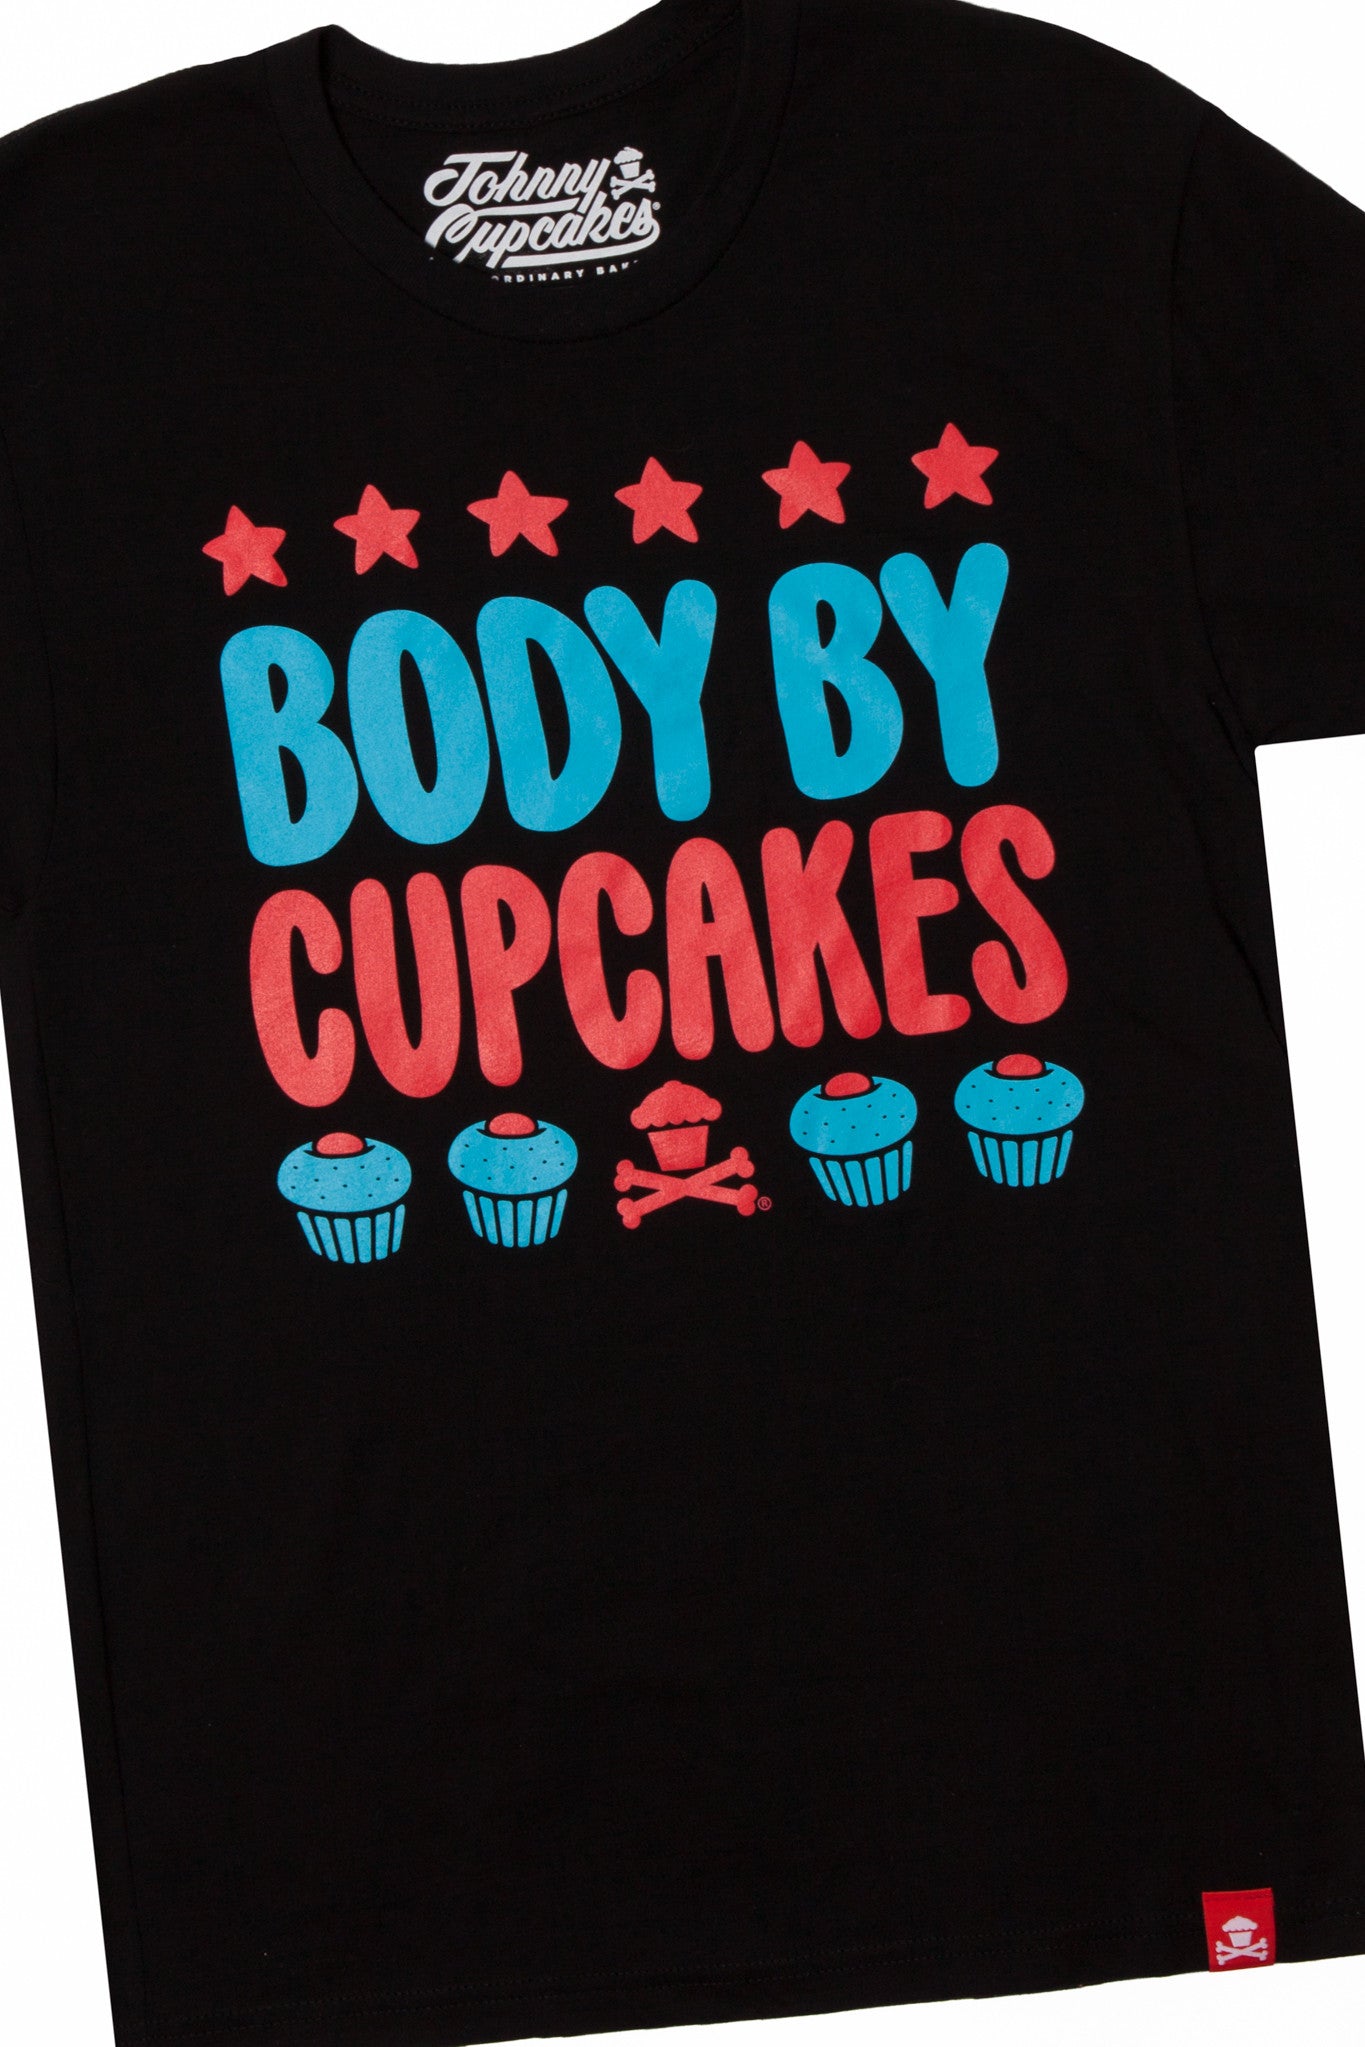 JC Vault - Adult Medium - Body By Cupcakes (Red / Blue)